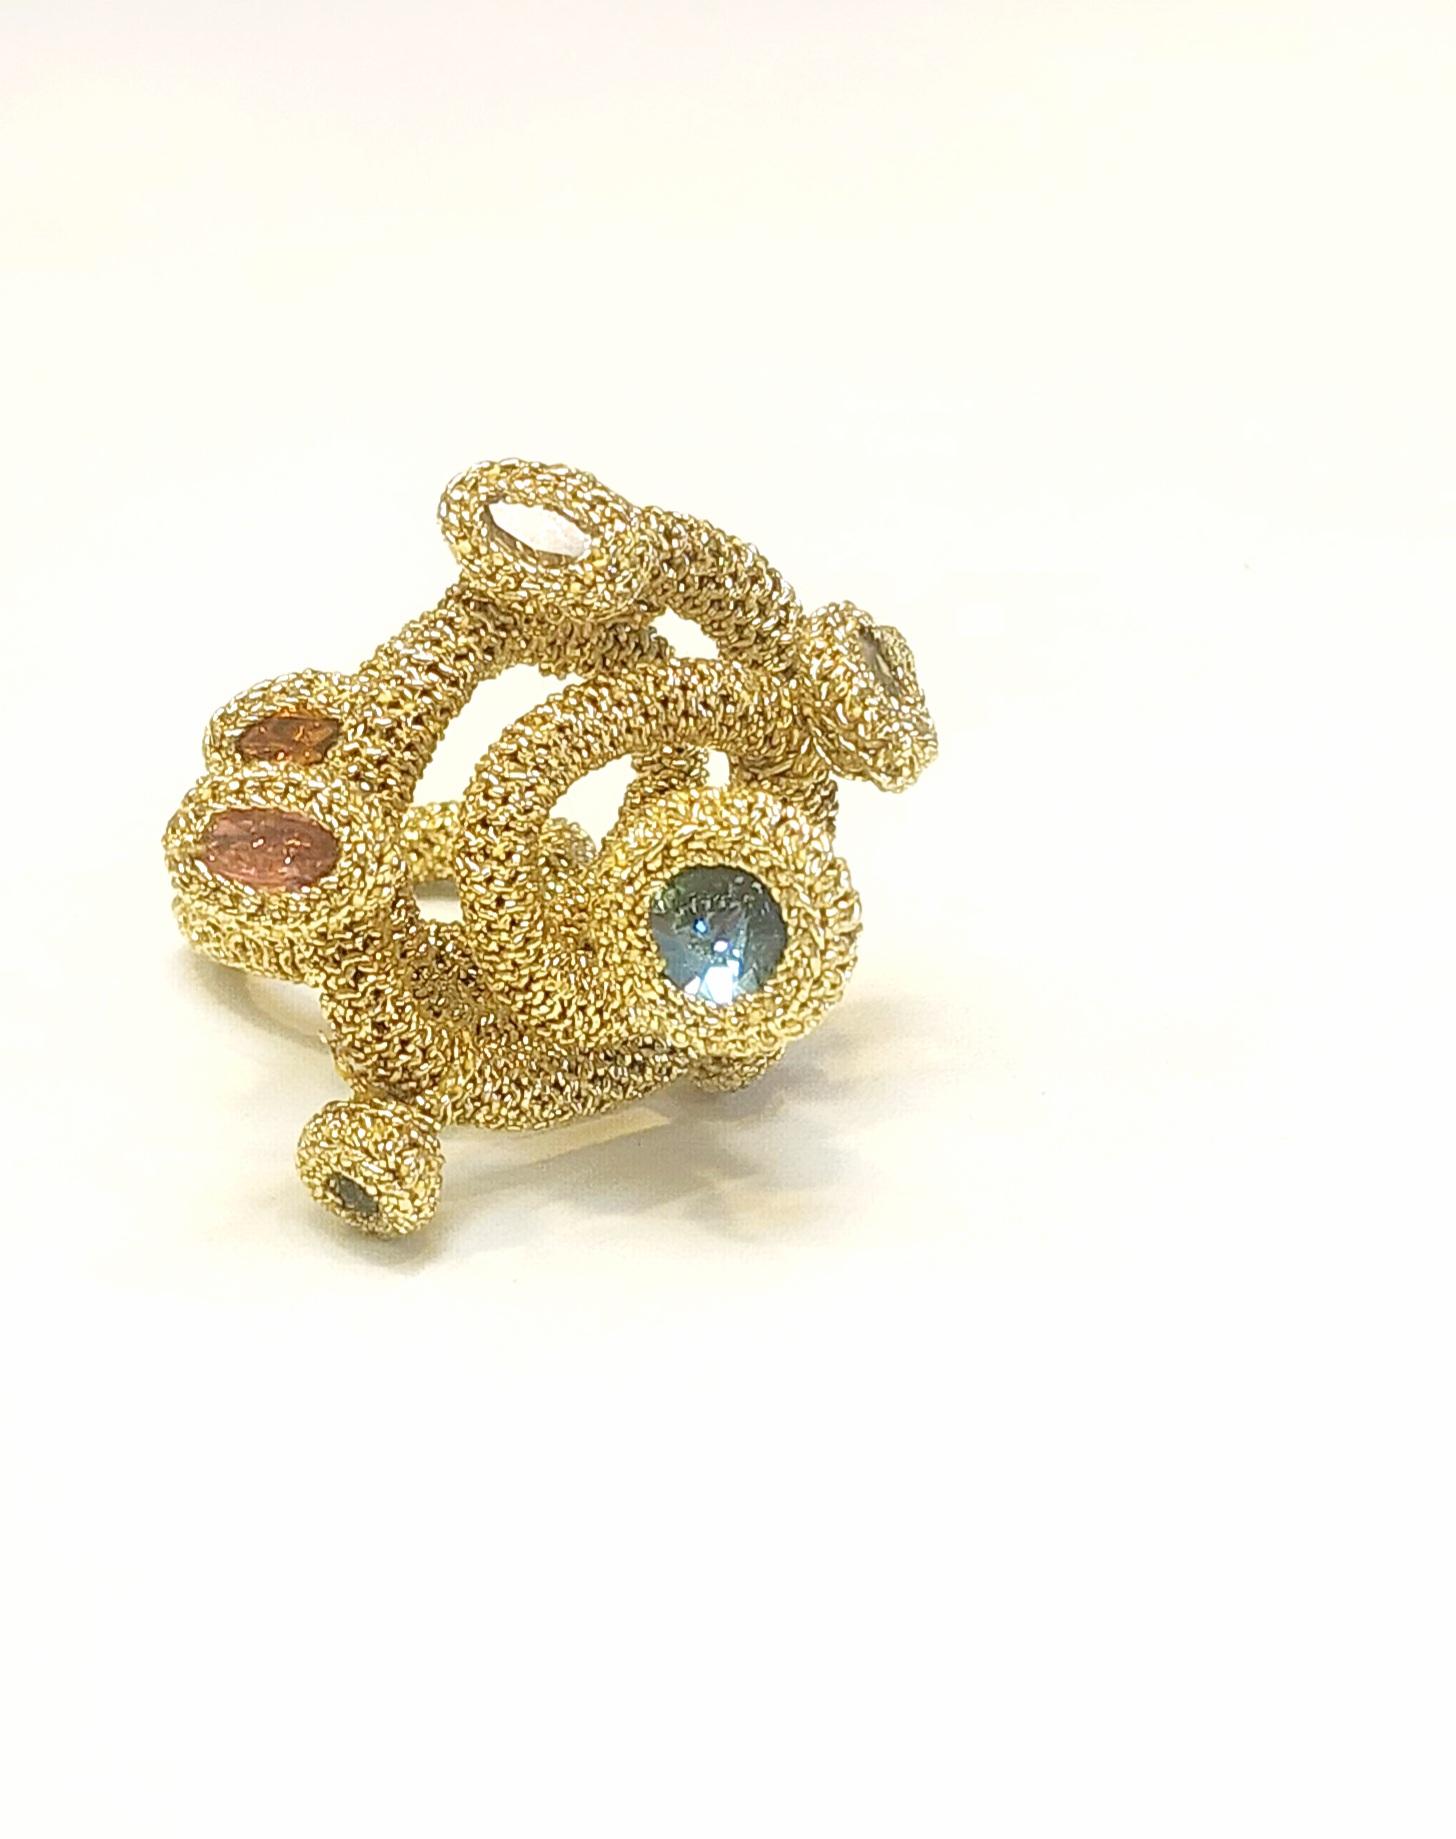 This is a very unique ring. I call it my galaxy ring. It is crochet around a metal wire which I then shaped into a spiral. I then added Swarovski crystals to enhance the movement of this beauty. The thread is a light gold smooth passing thread. 